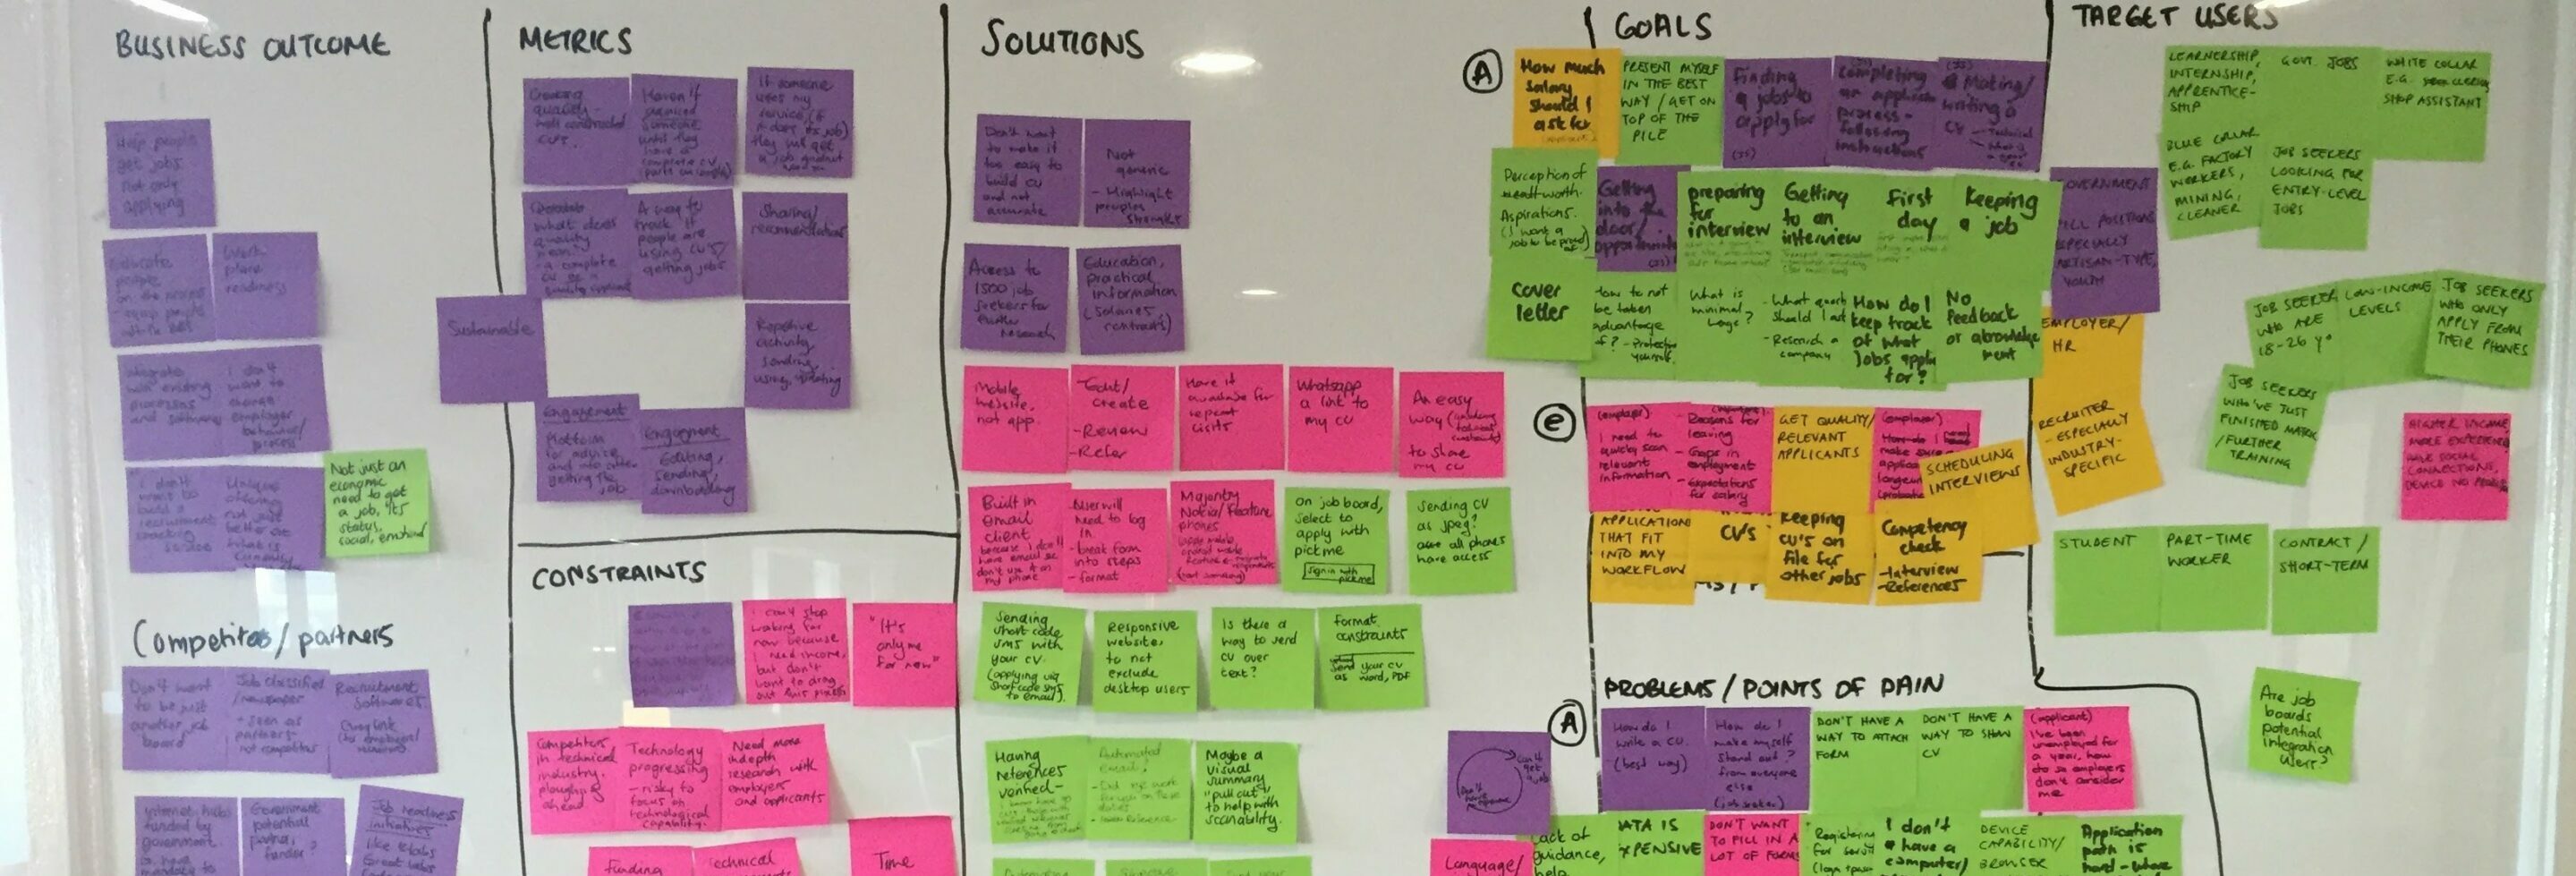 Product discovery canvas